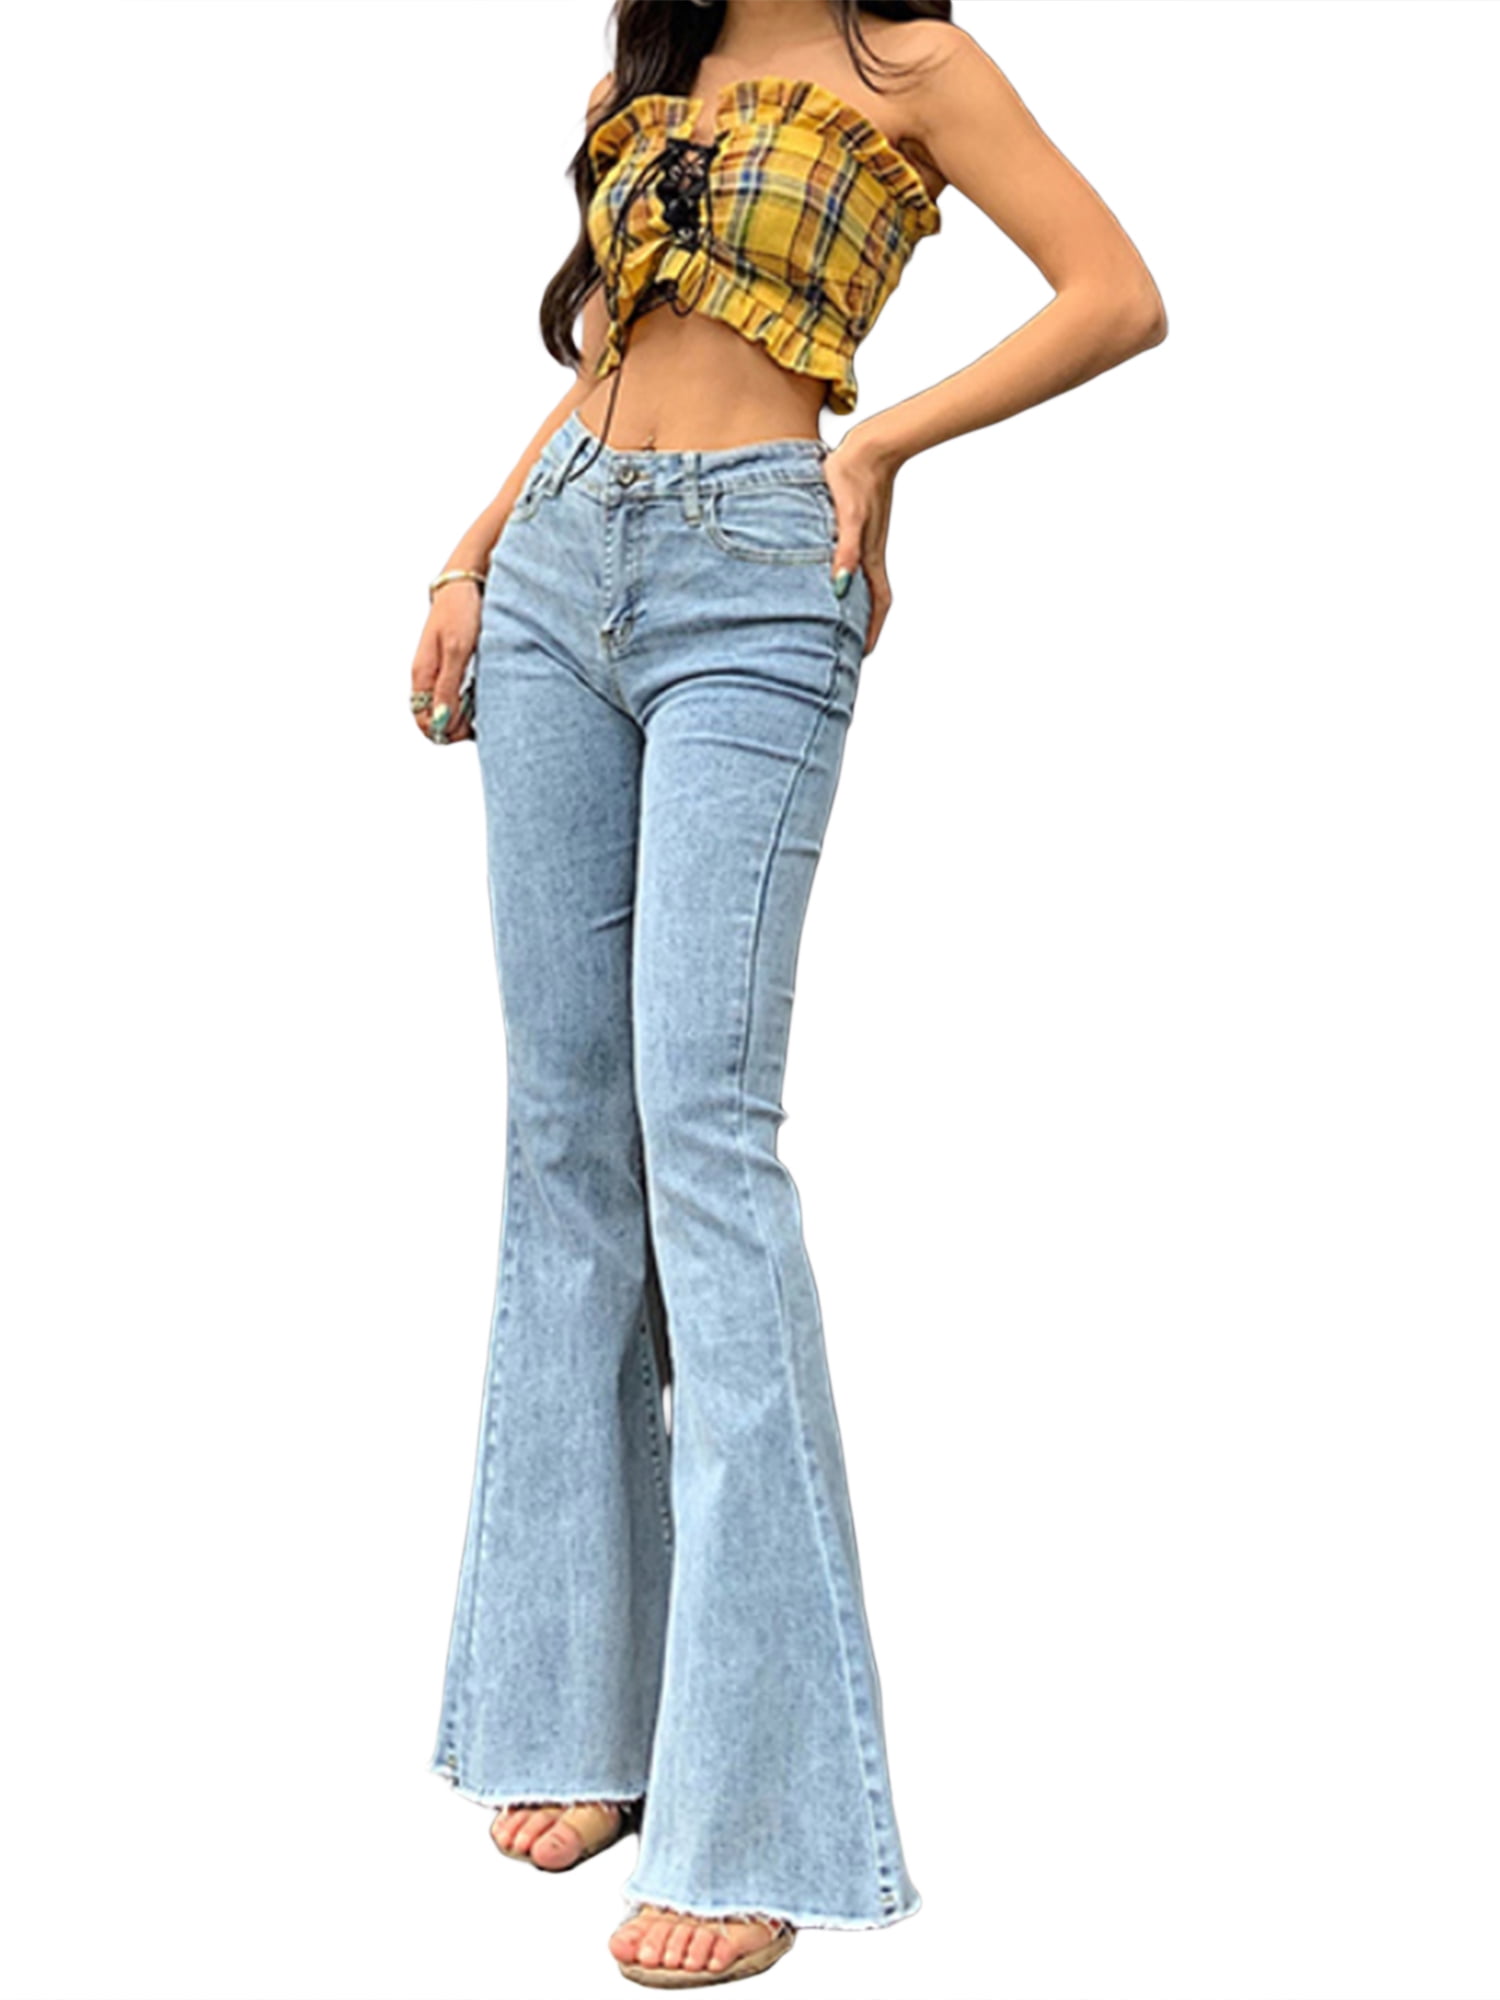 Women's High Waisted Flared Bell Bottoms Jeans/vintage 70s  Style/bohemian/hippie Pants/made to Order. 